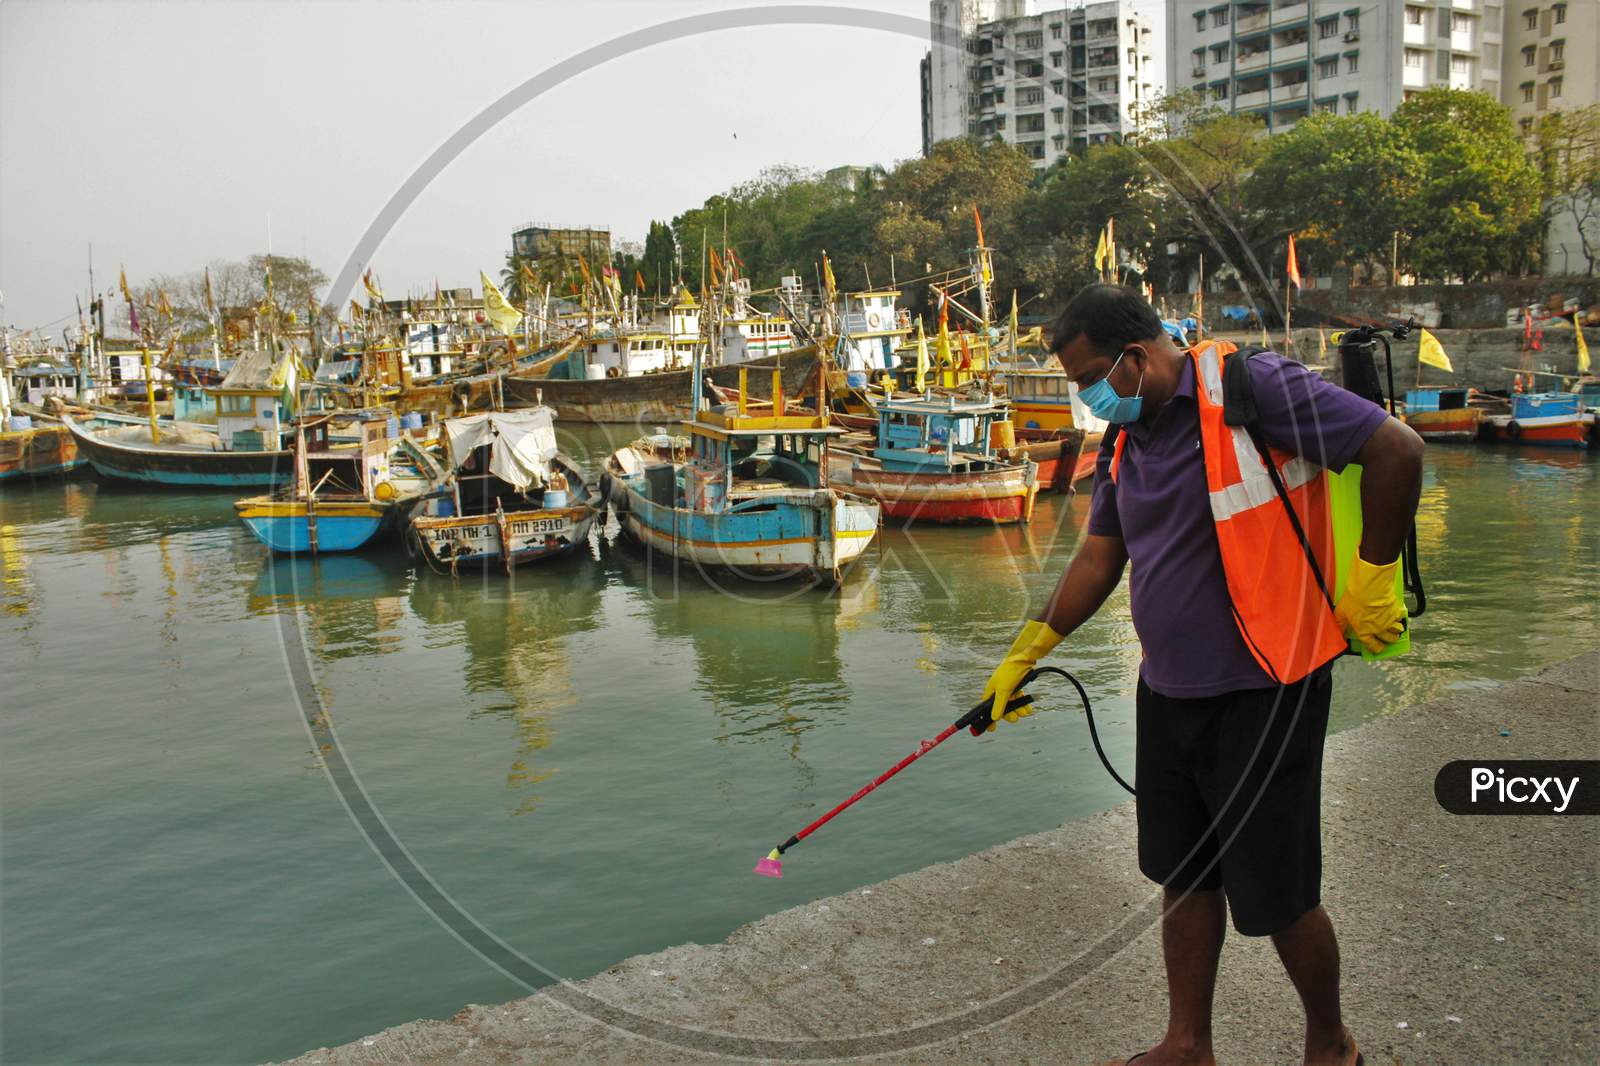 A worker sprays disinfectant at a deserted fish market after the extension of the 21- day nationwide lockdown to limit the spreading of coronavirus disease (COVID-19) in Mumbai, India, on April 15, 2020.